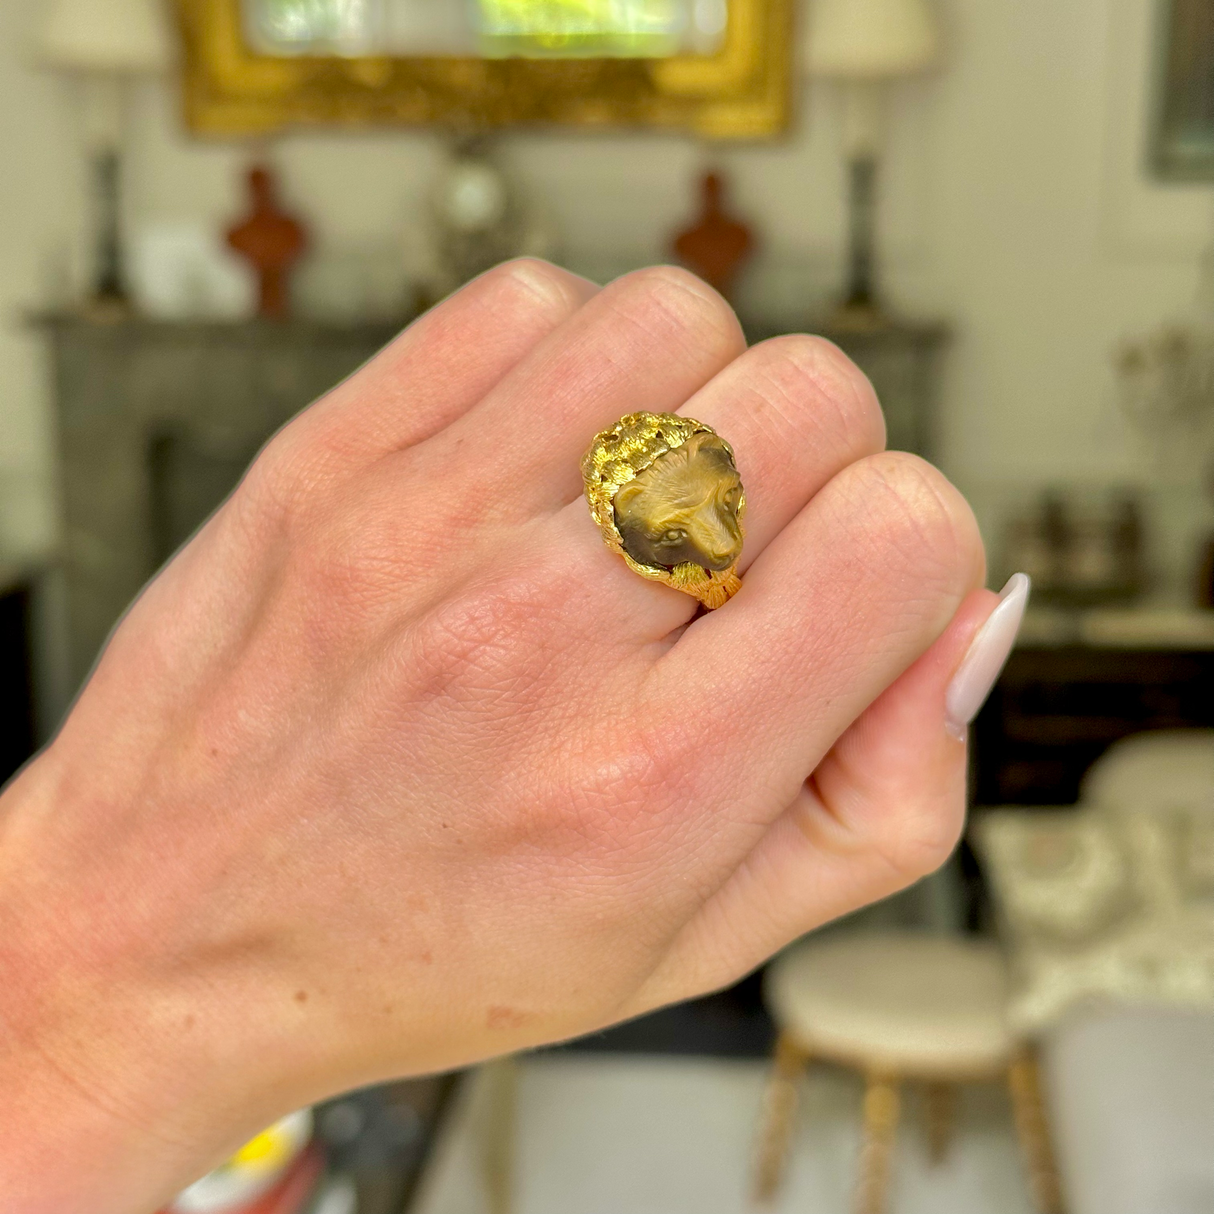 Unusual tiger's eye honey bear and yellow gold ring, worn on hand.